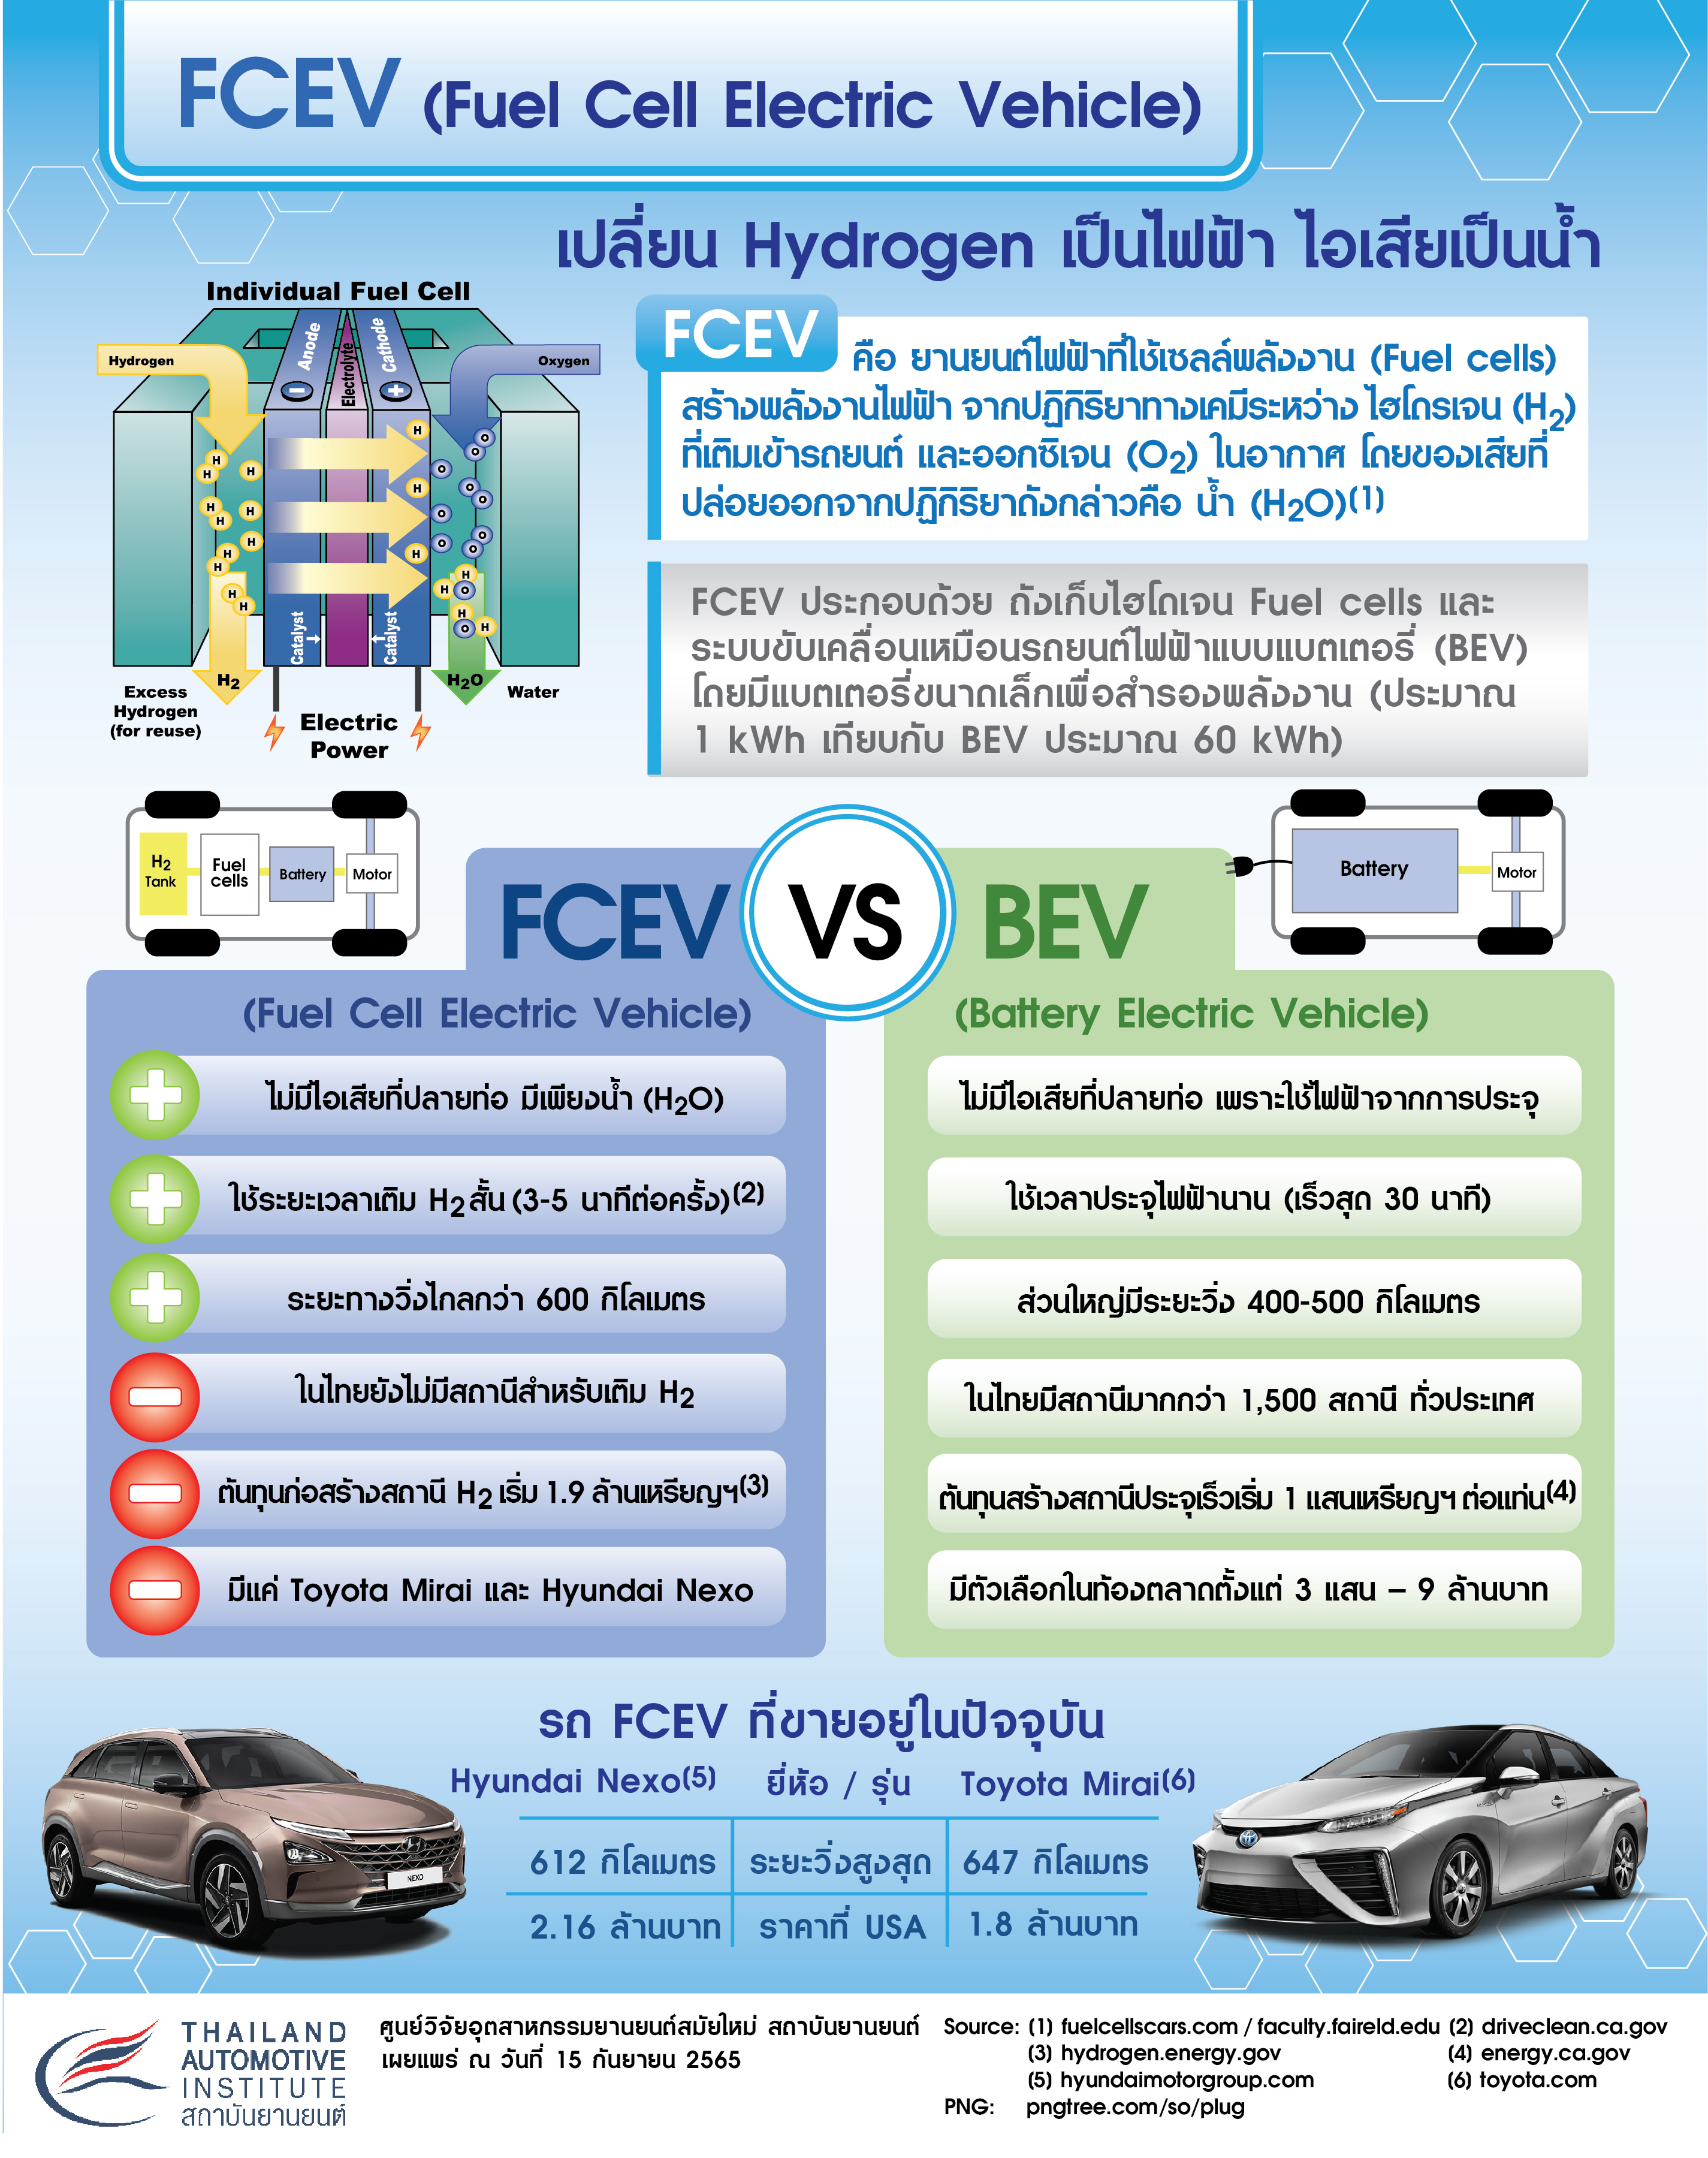 FCVE (Fuel Cell Electric Vehicle)